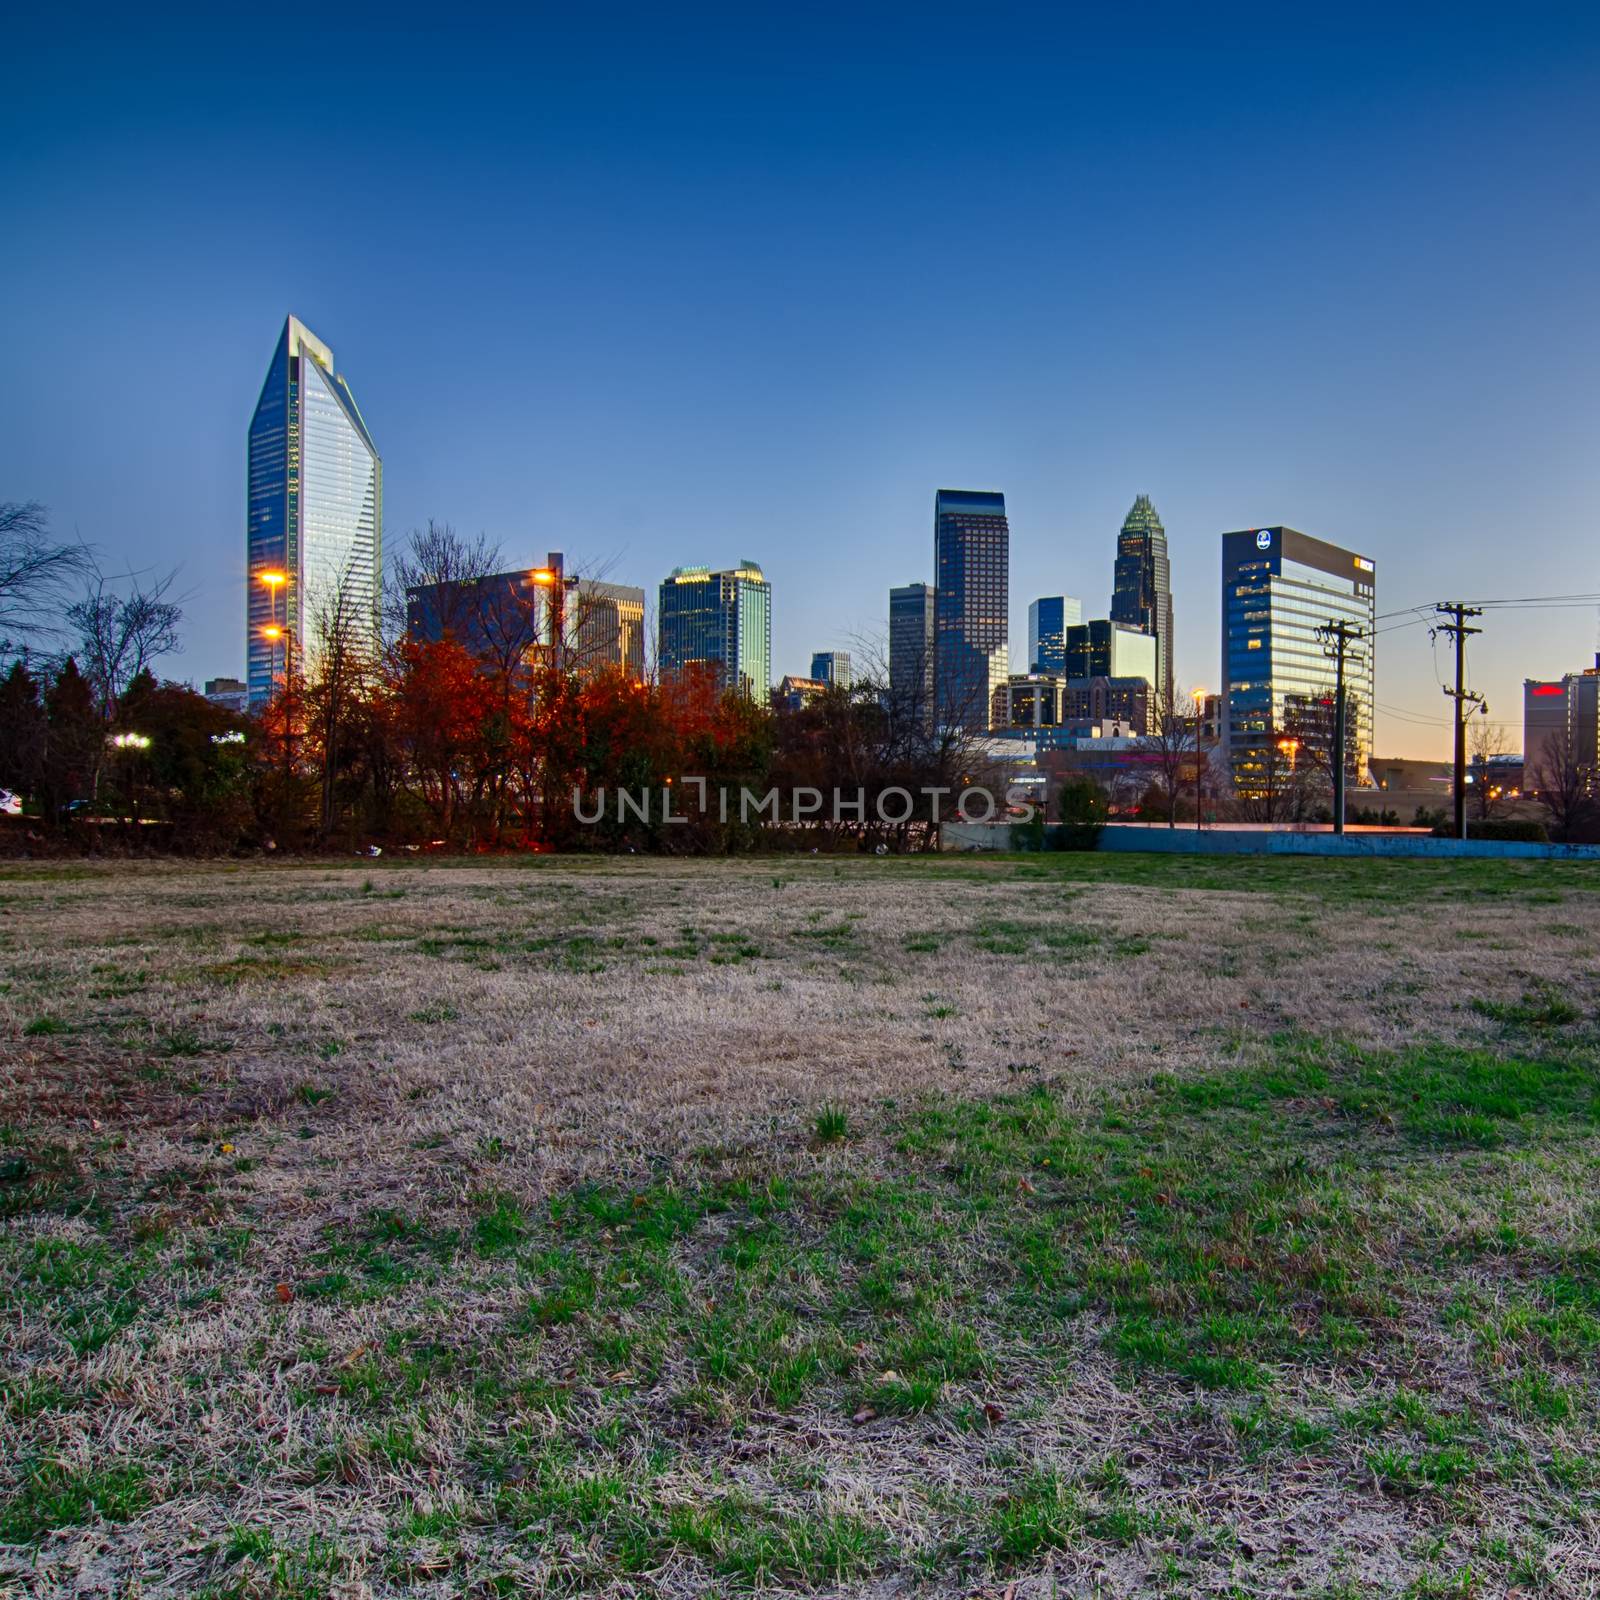 early morning in charlotte nc by digidreamgrafix